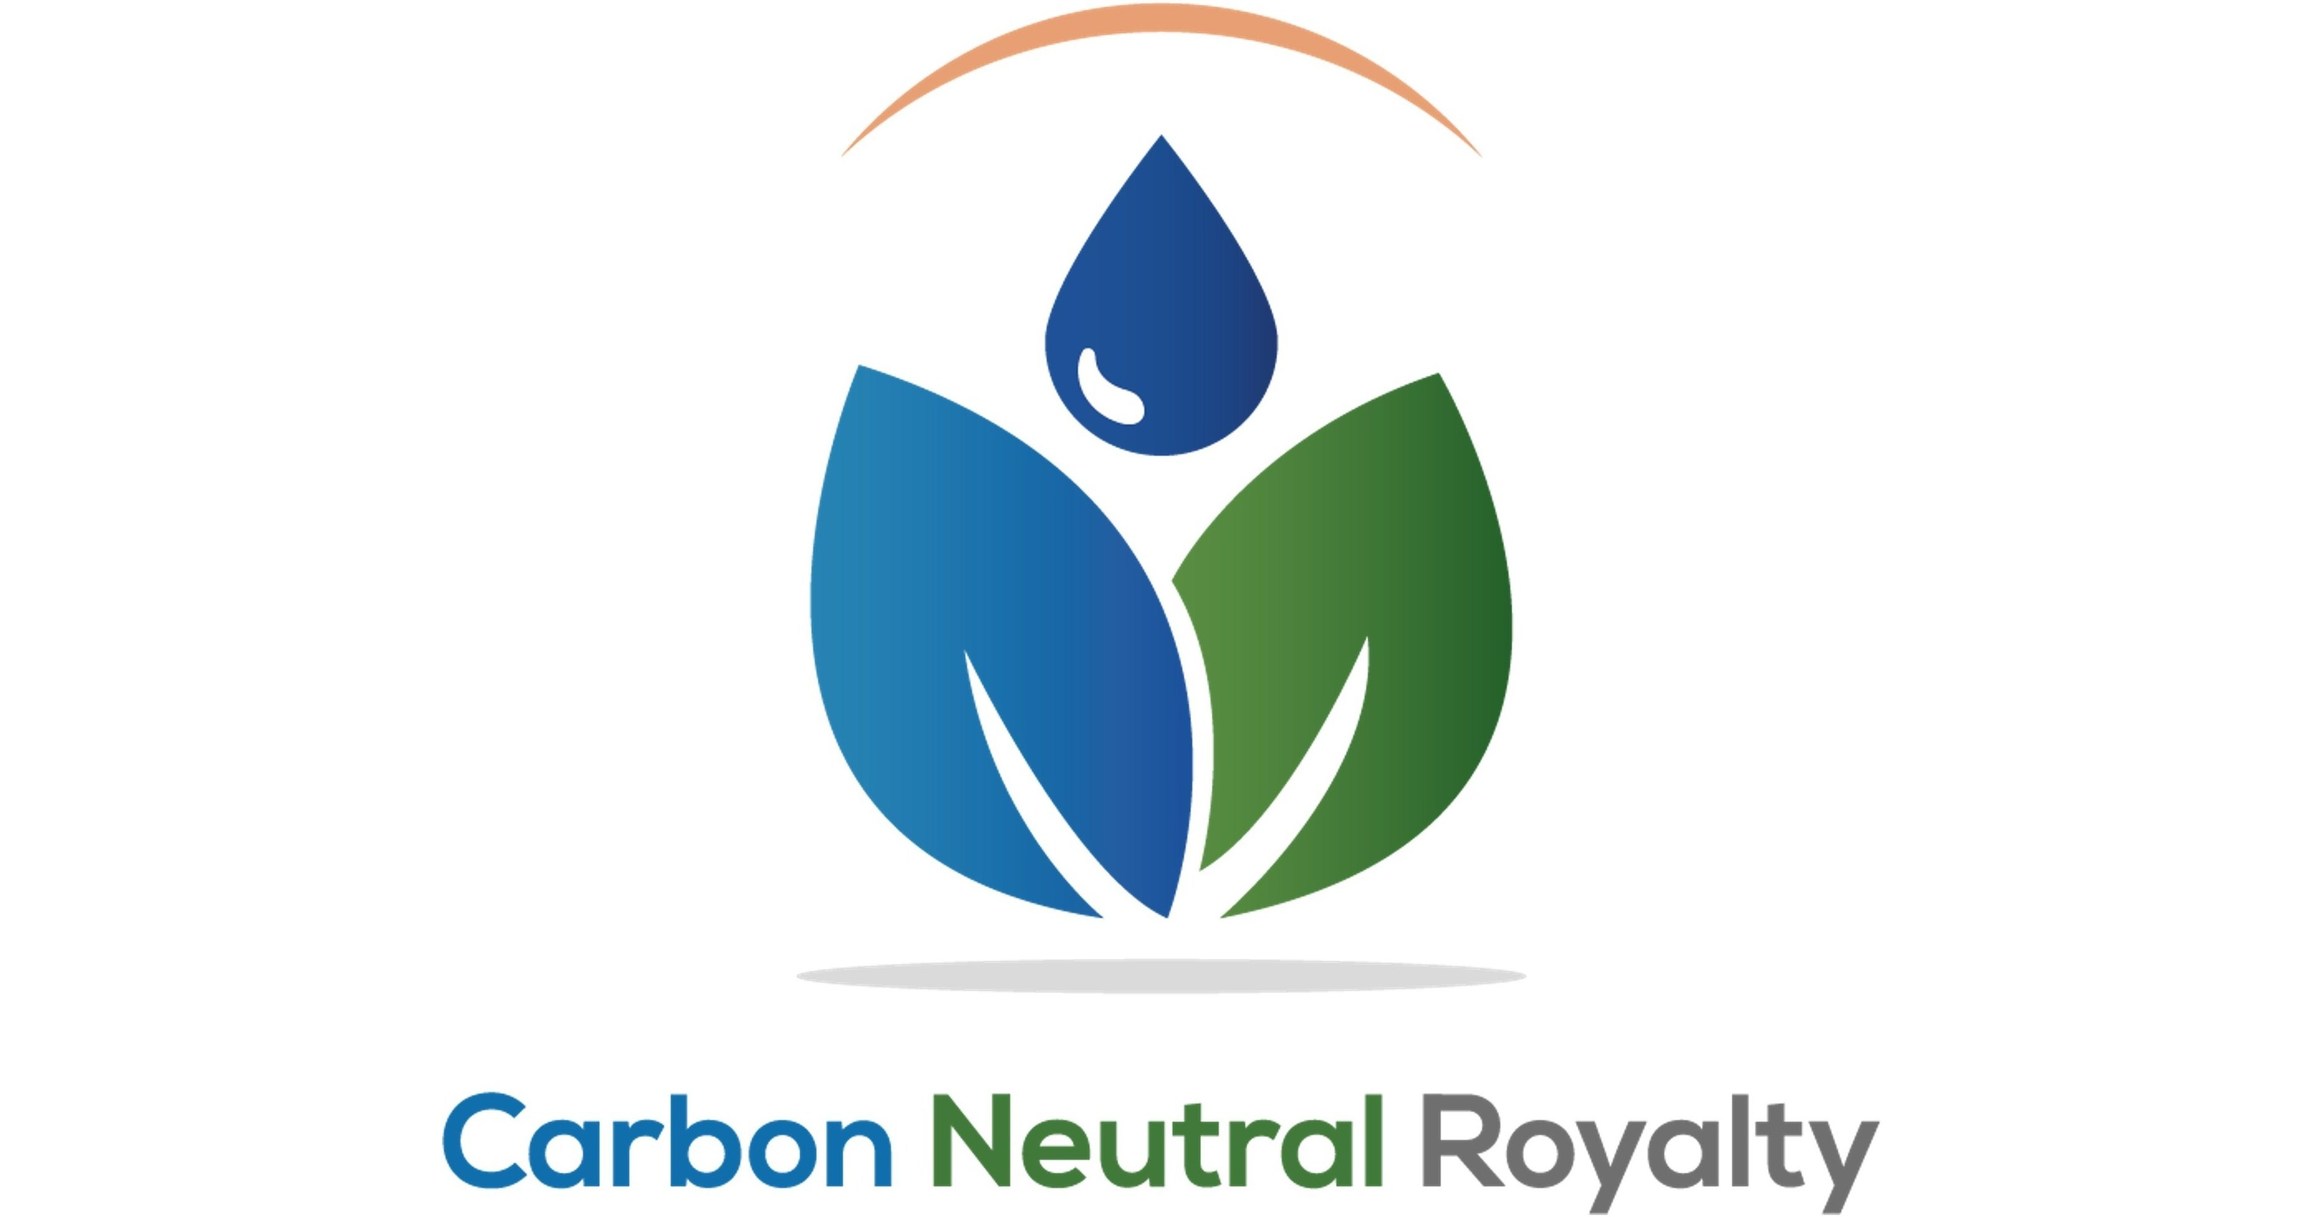 CARBON NEUTRAL ROYALTY ANNOUNCES THE APPOINTMENT OF CLARE TOVEY AND IGNUS ROCHER